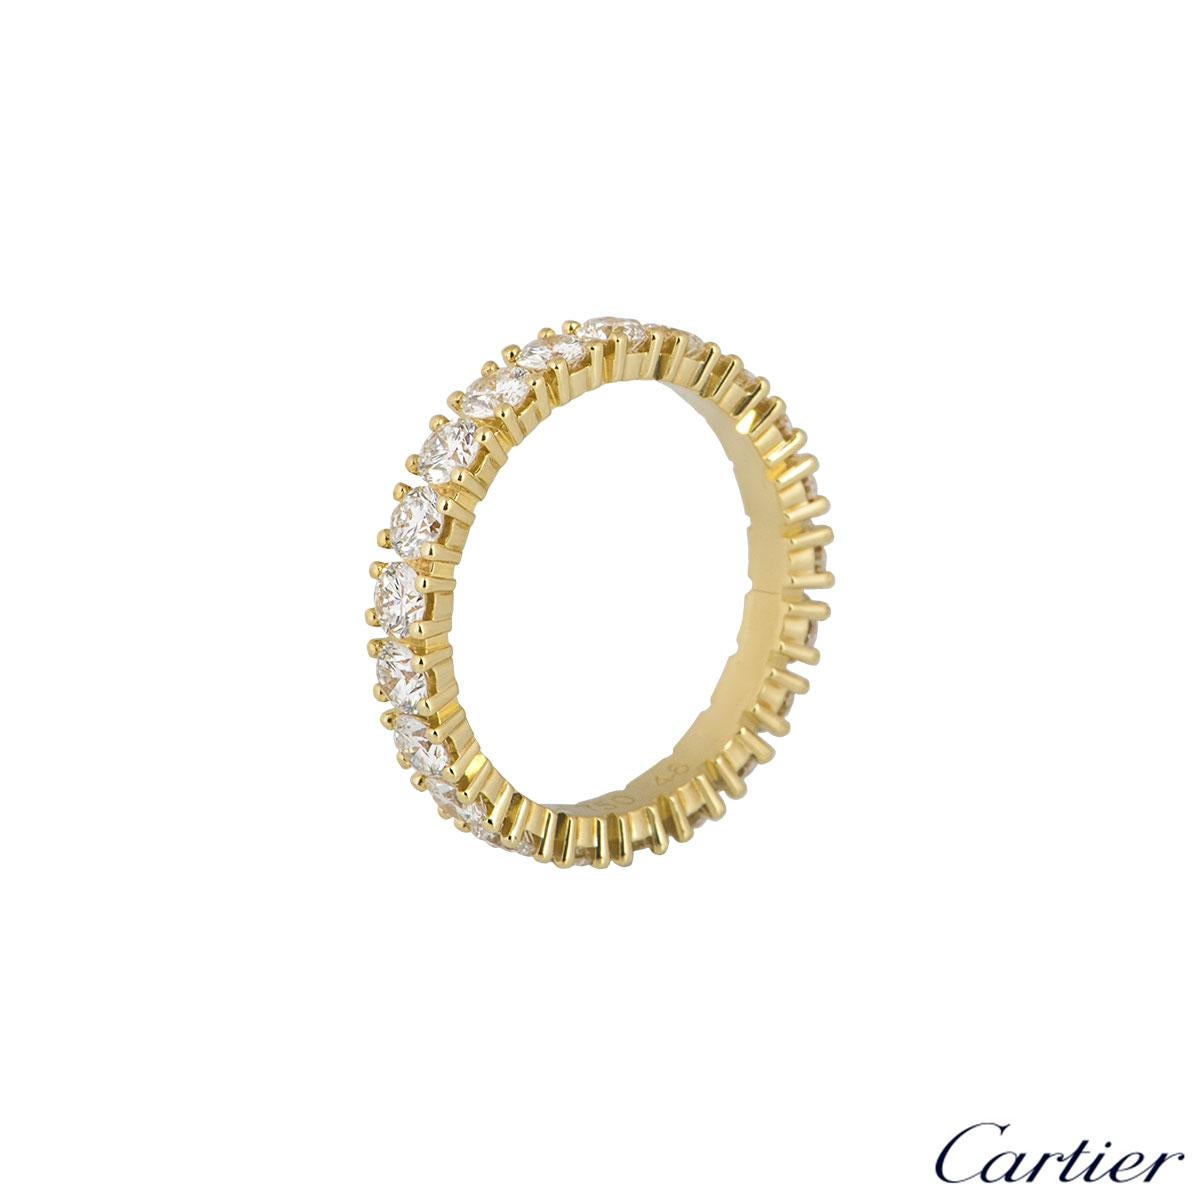 A beautiful 18k yellow gold Cartier diamond ring from the Etincelle De Cartier collection. The ring comprises of a full eternity of 21 round brilliant cut diamonds in a shared 4 claw setting all the way round. The diamonds have a total weight of